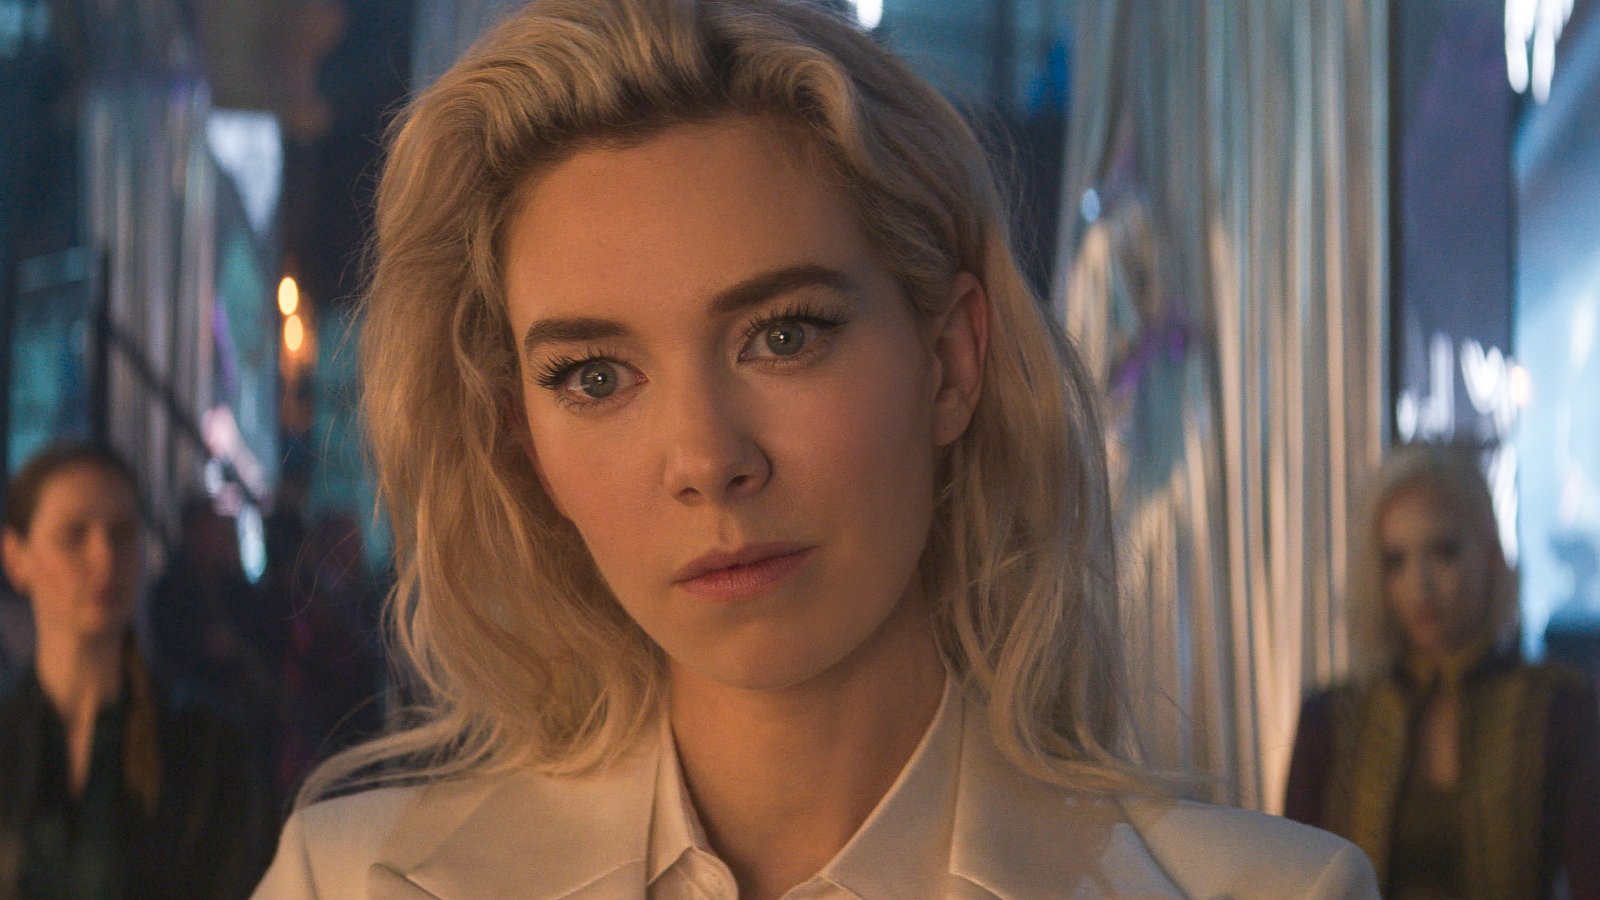 Mission: Impossible 7, Vanessa Kirby and Pom Klementieff took 40 takes... to recover a key